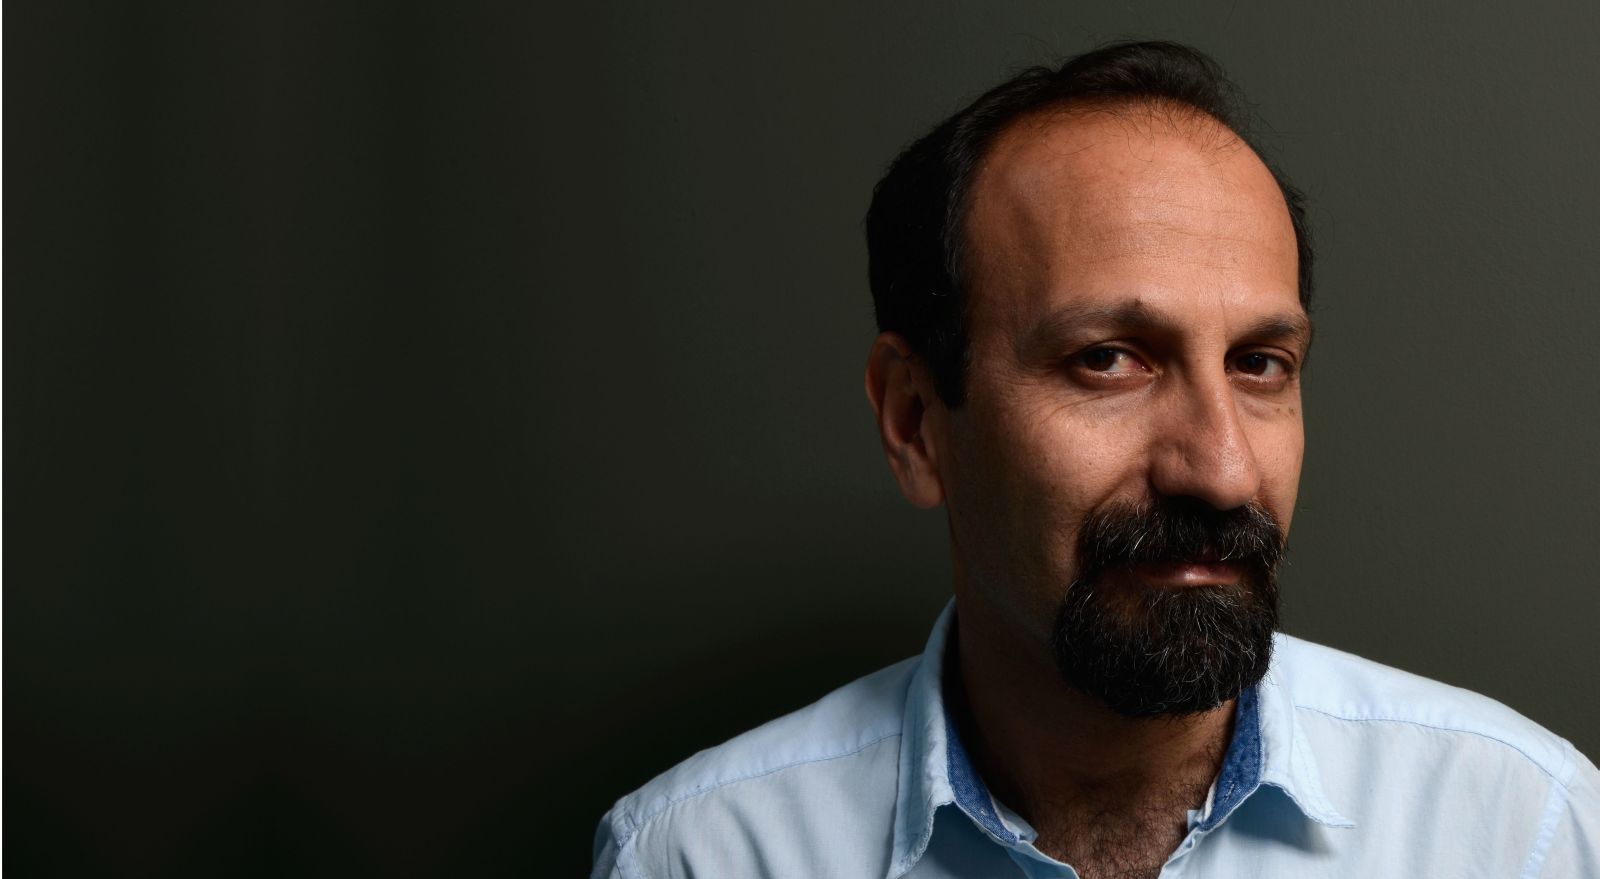 TORONTO, ON - SEPTEMBER 06:  Director Asghar Farhadi of 'The Past' poses at the Guess Portrait Studio during 2013 Toronto International Film on September 6, 2013 in Toronto, Canada.  (Photo by Larry Busacca/Getty Images)